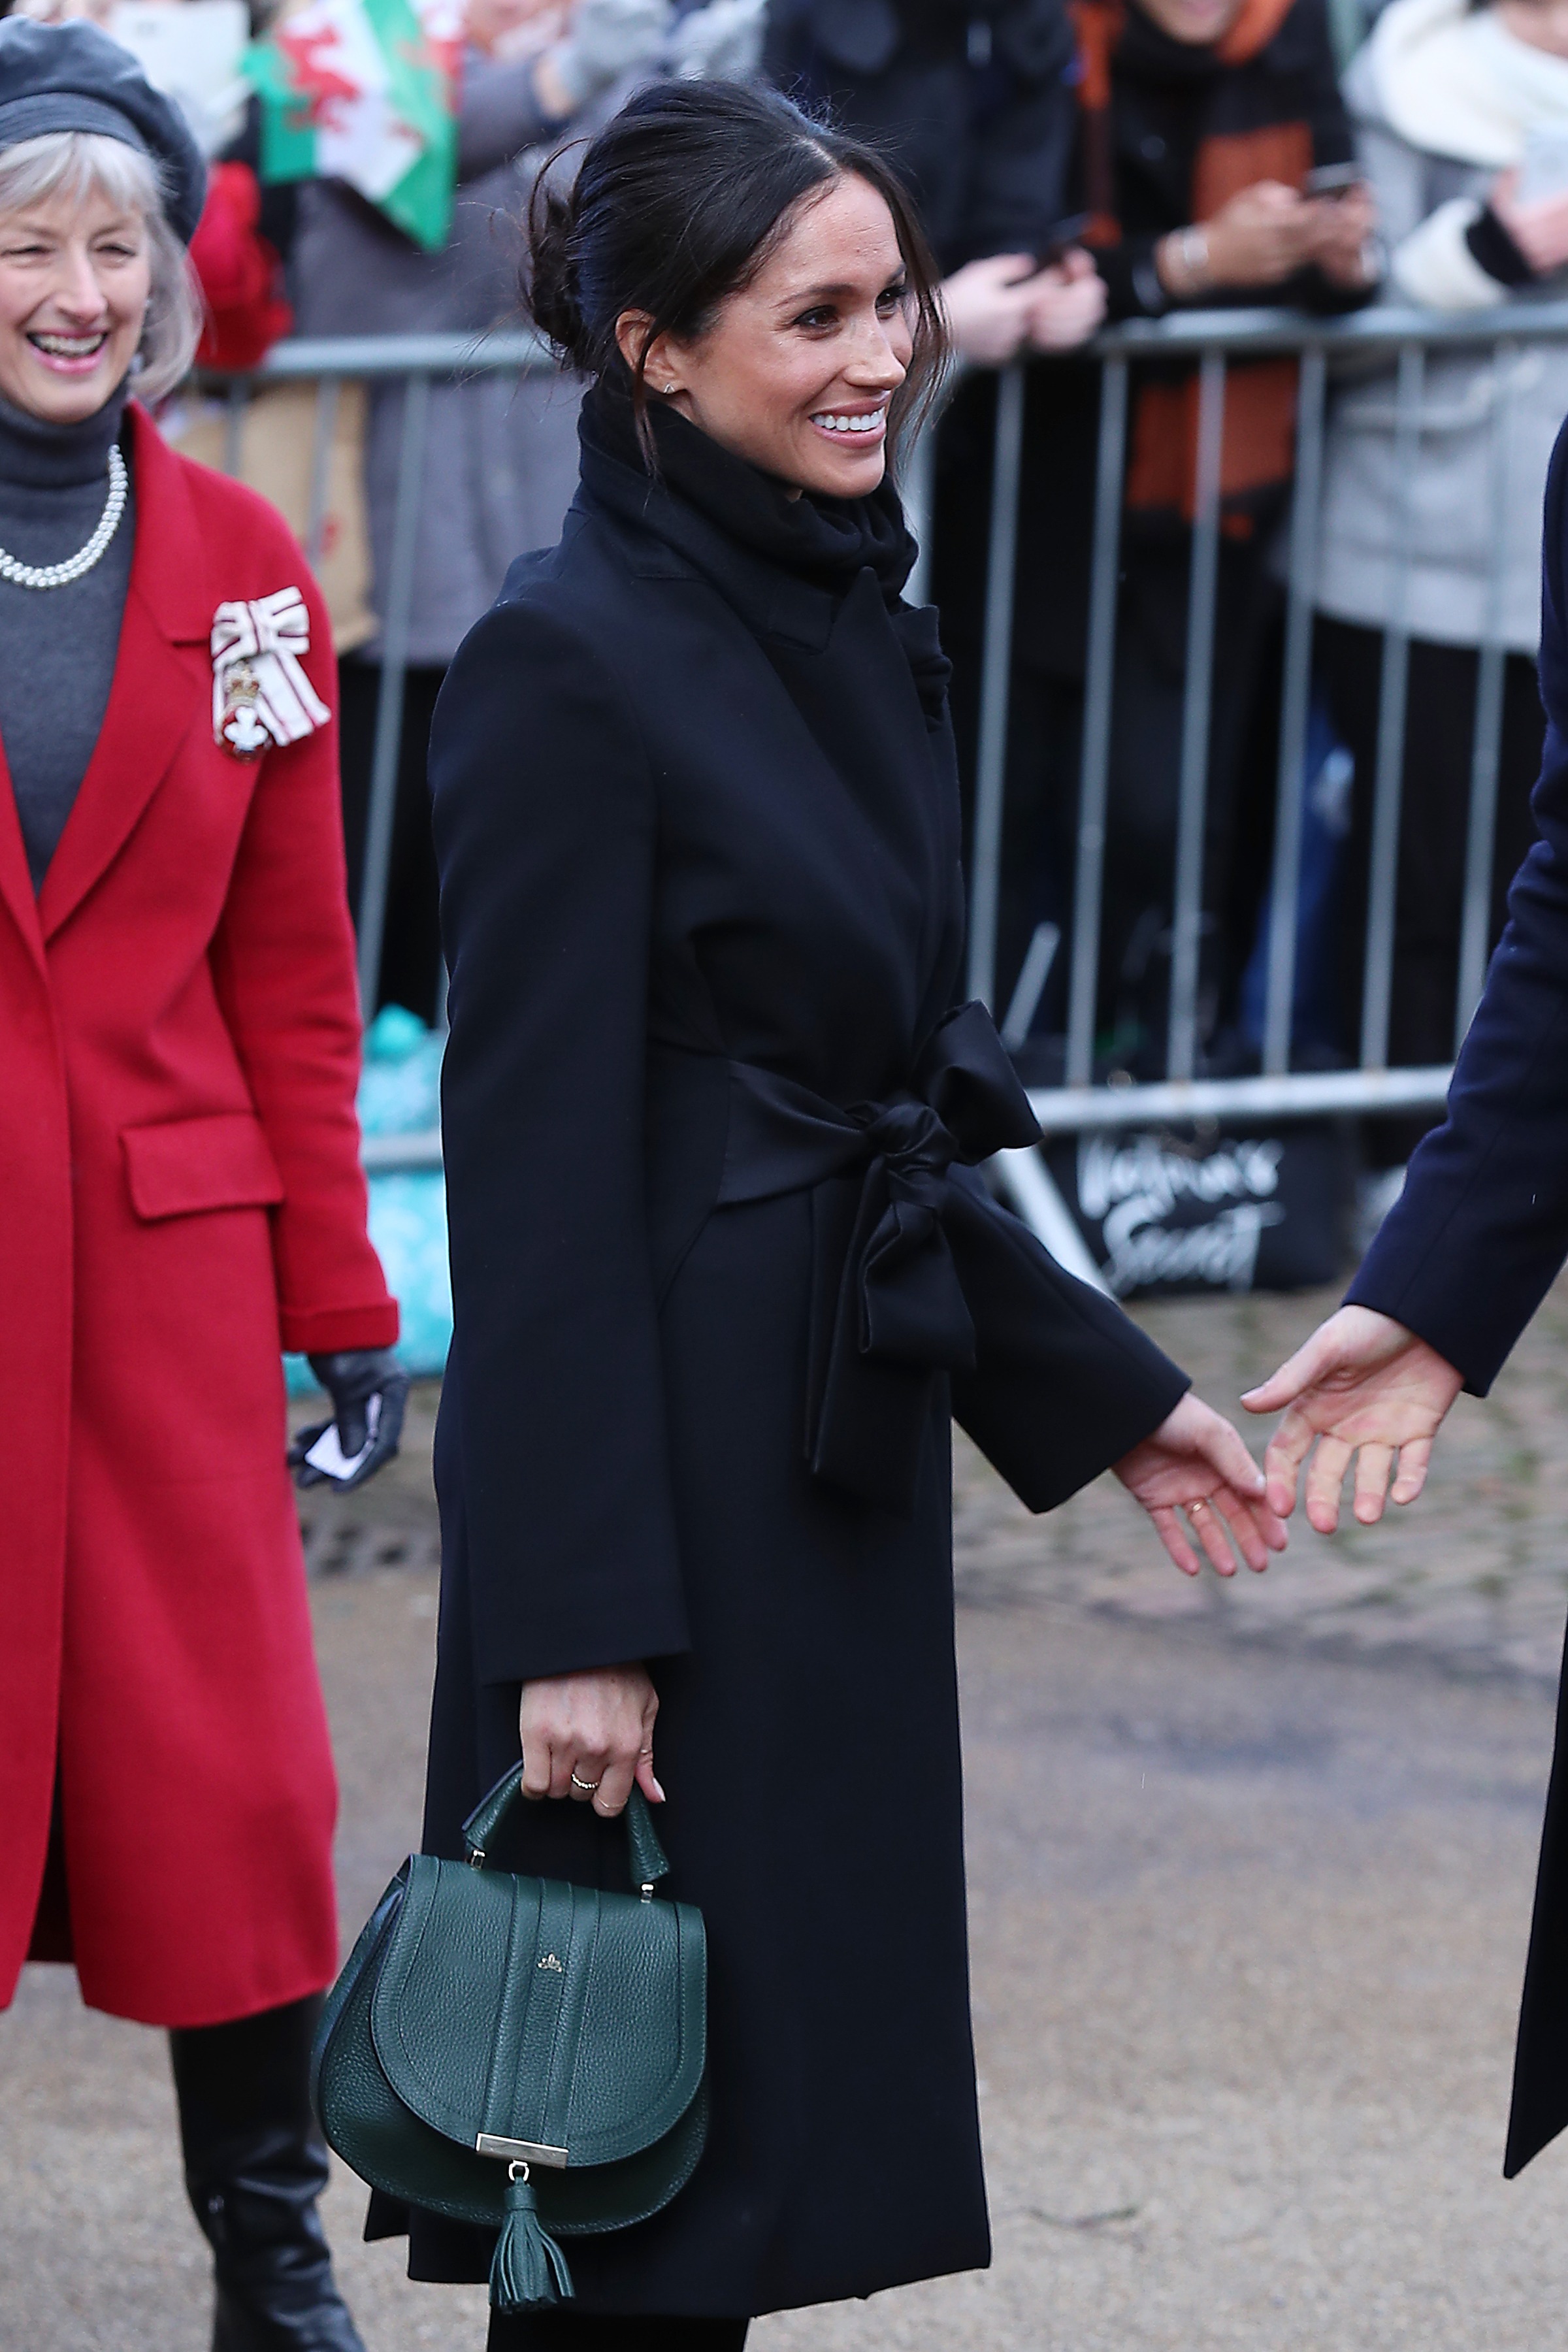 Prince Harry And Meghan Markle Visit Cardiff Castle (Neil Mockford—GC Images)